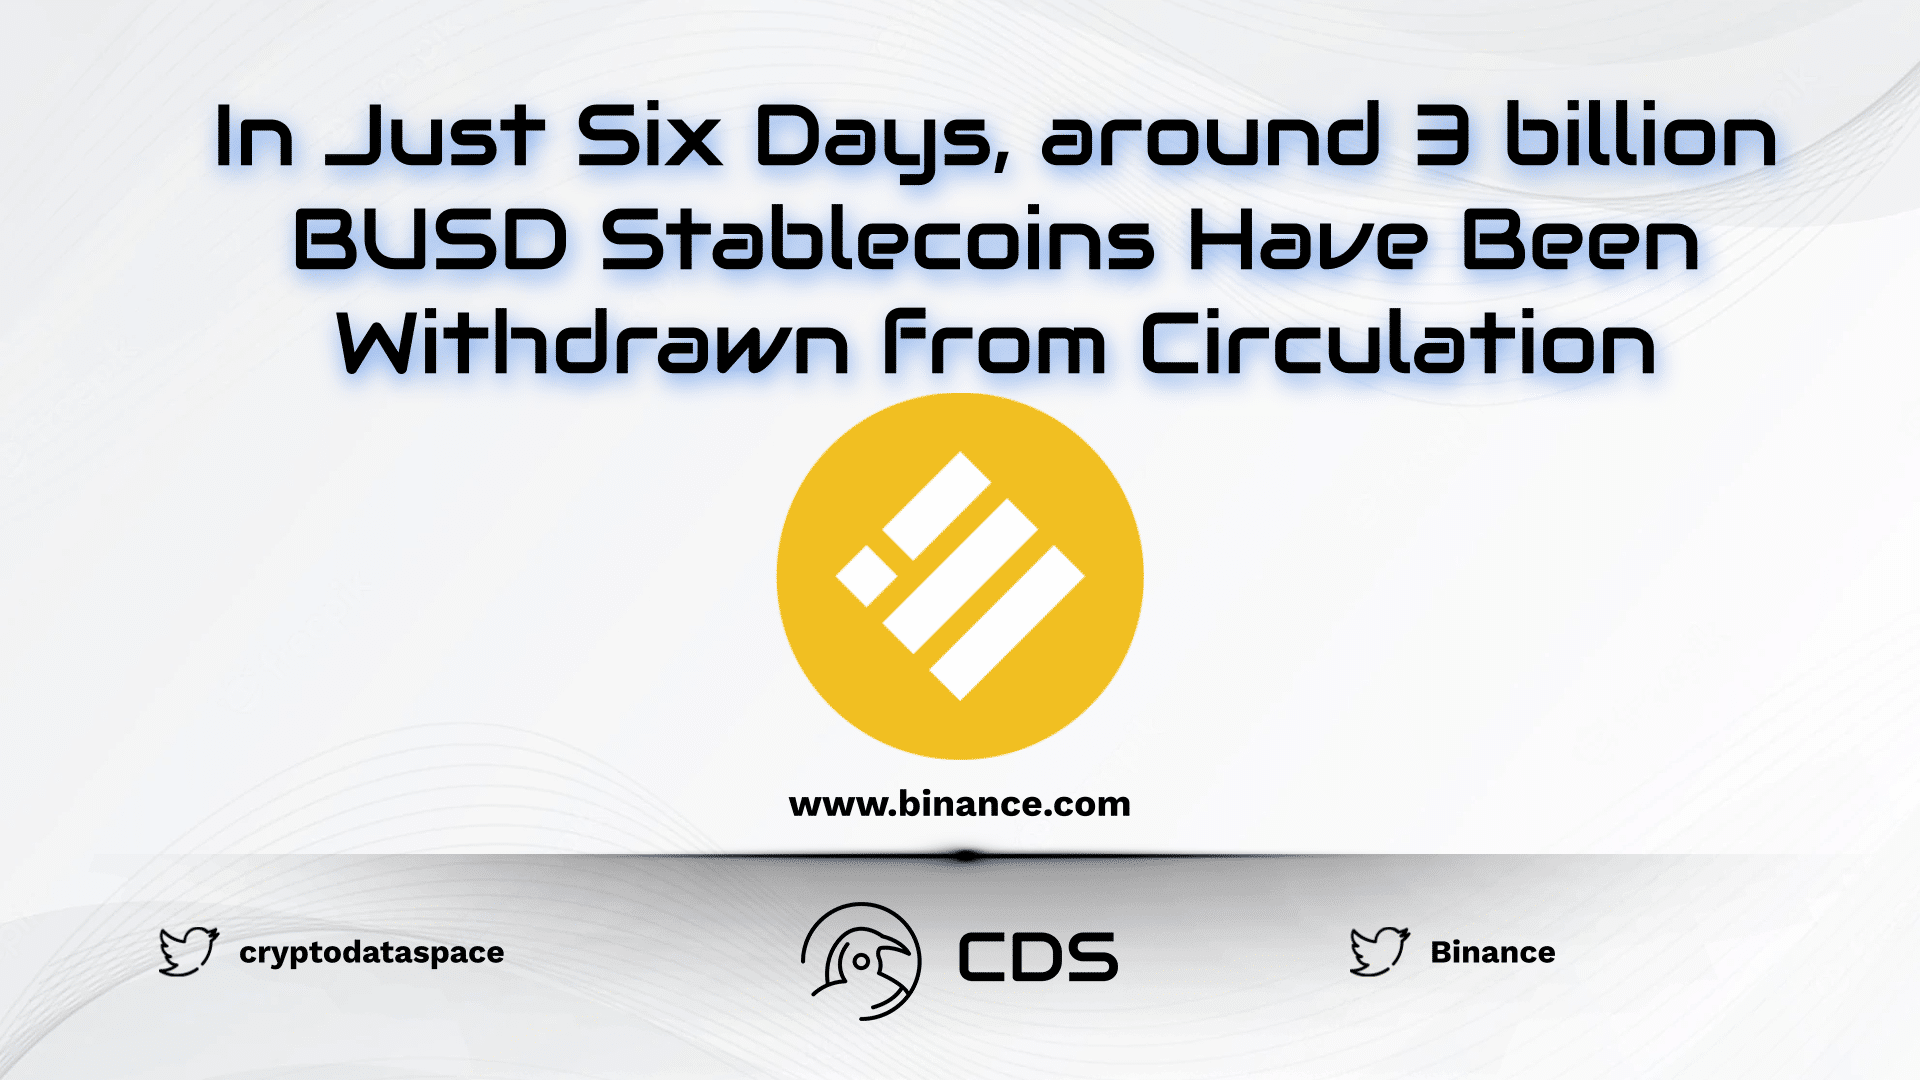 In Just Six Days, around 3 billion BUSD Stablecoins Have Been Withdrawn from Circulation